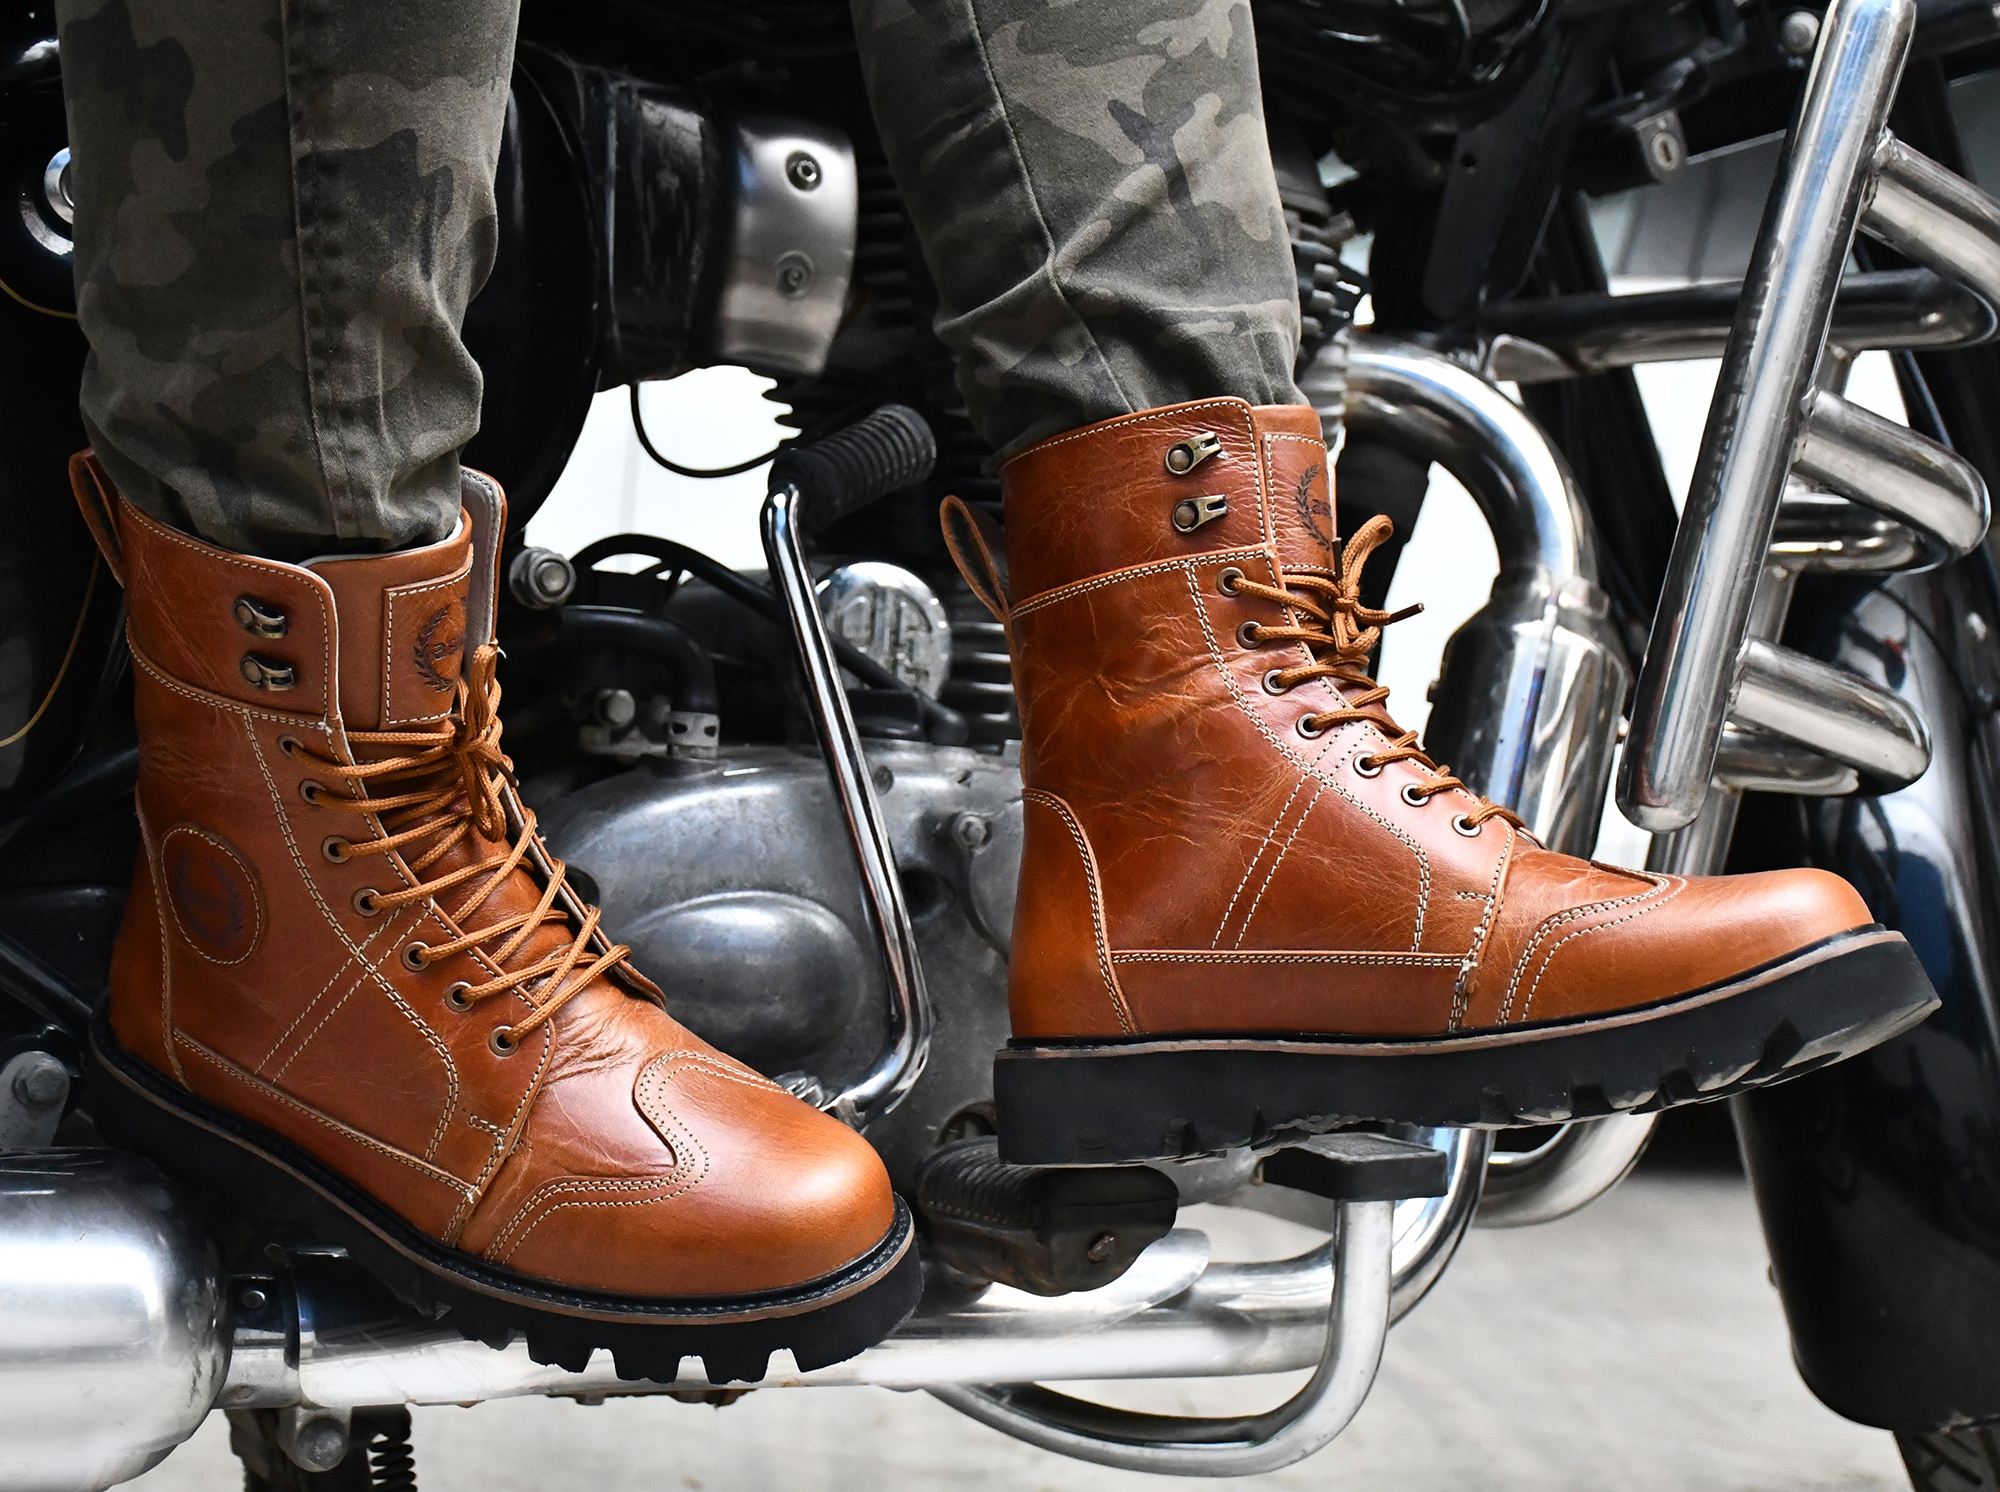 Biker Boots : Urban Rugged Tan leather boots for bikers with EVA Sole. Article :702E-Tan